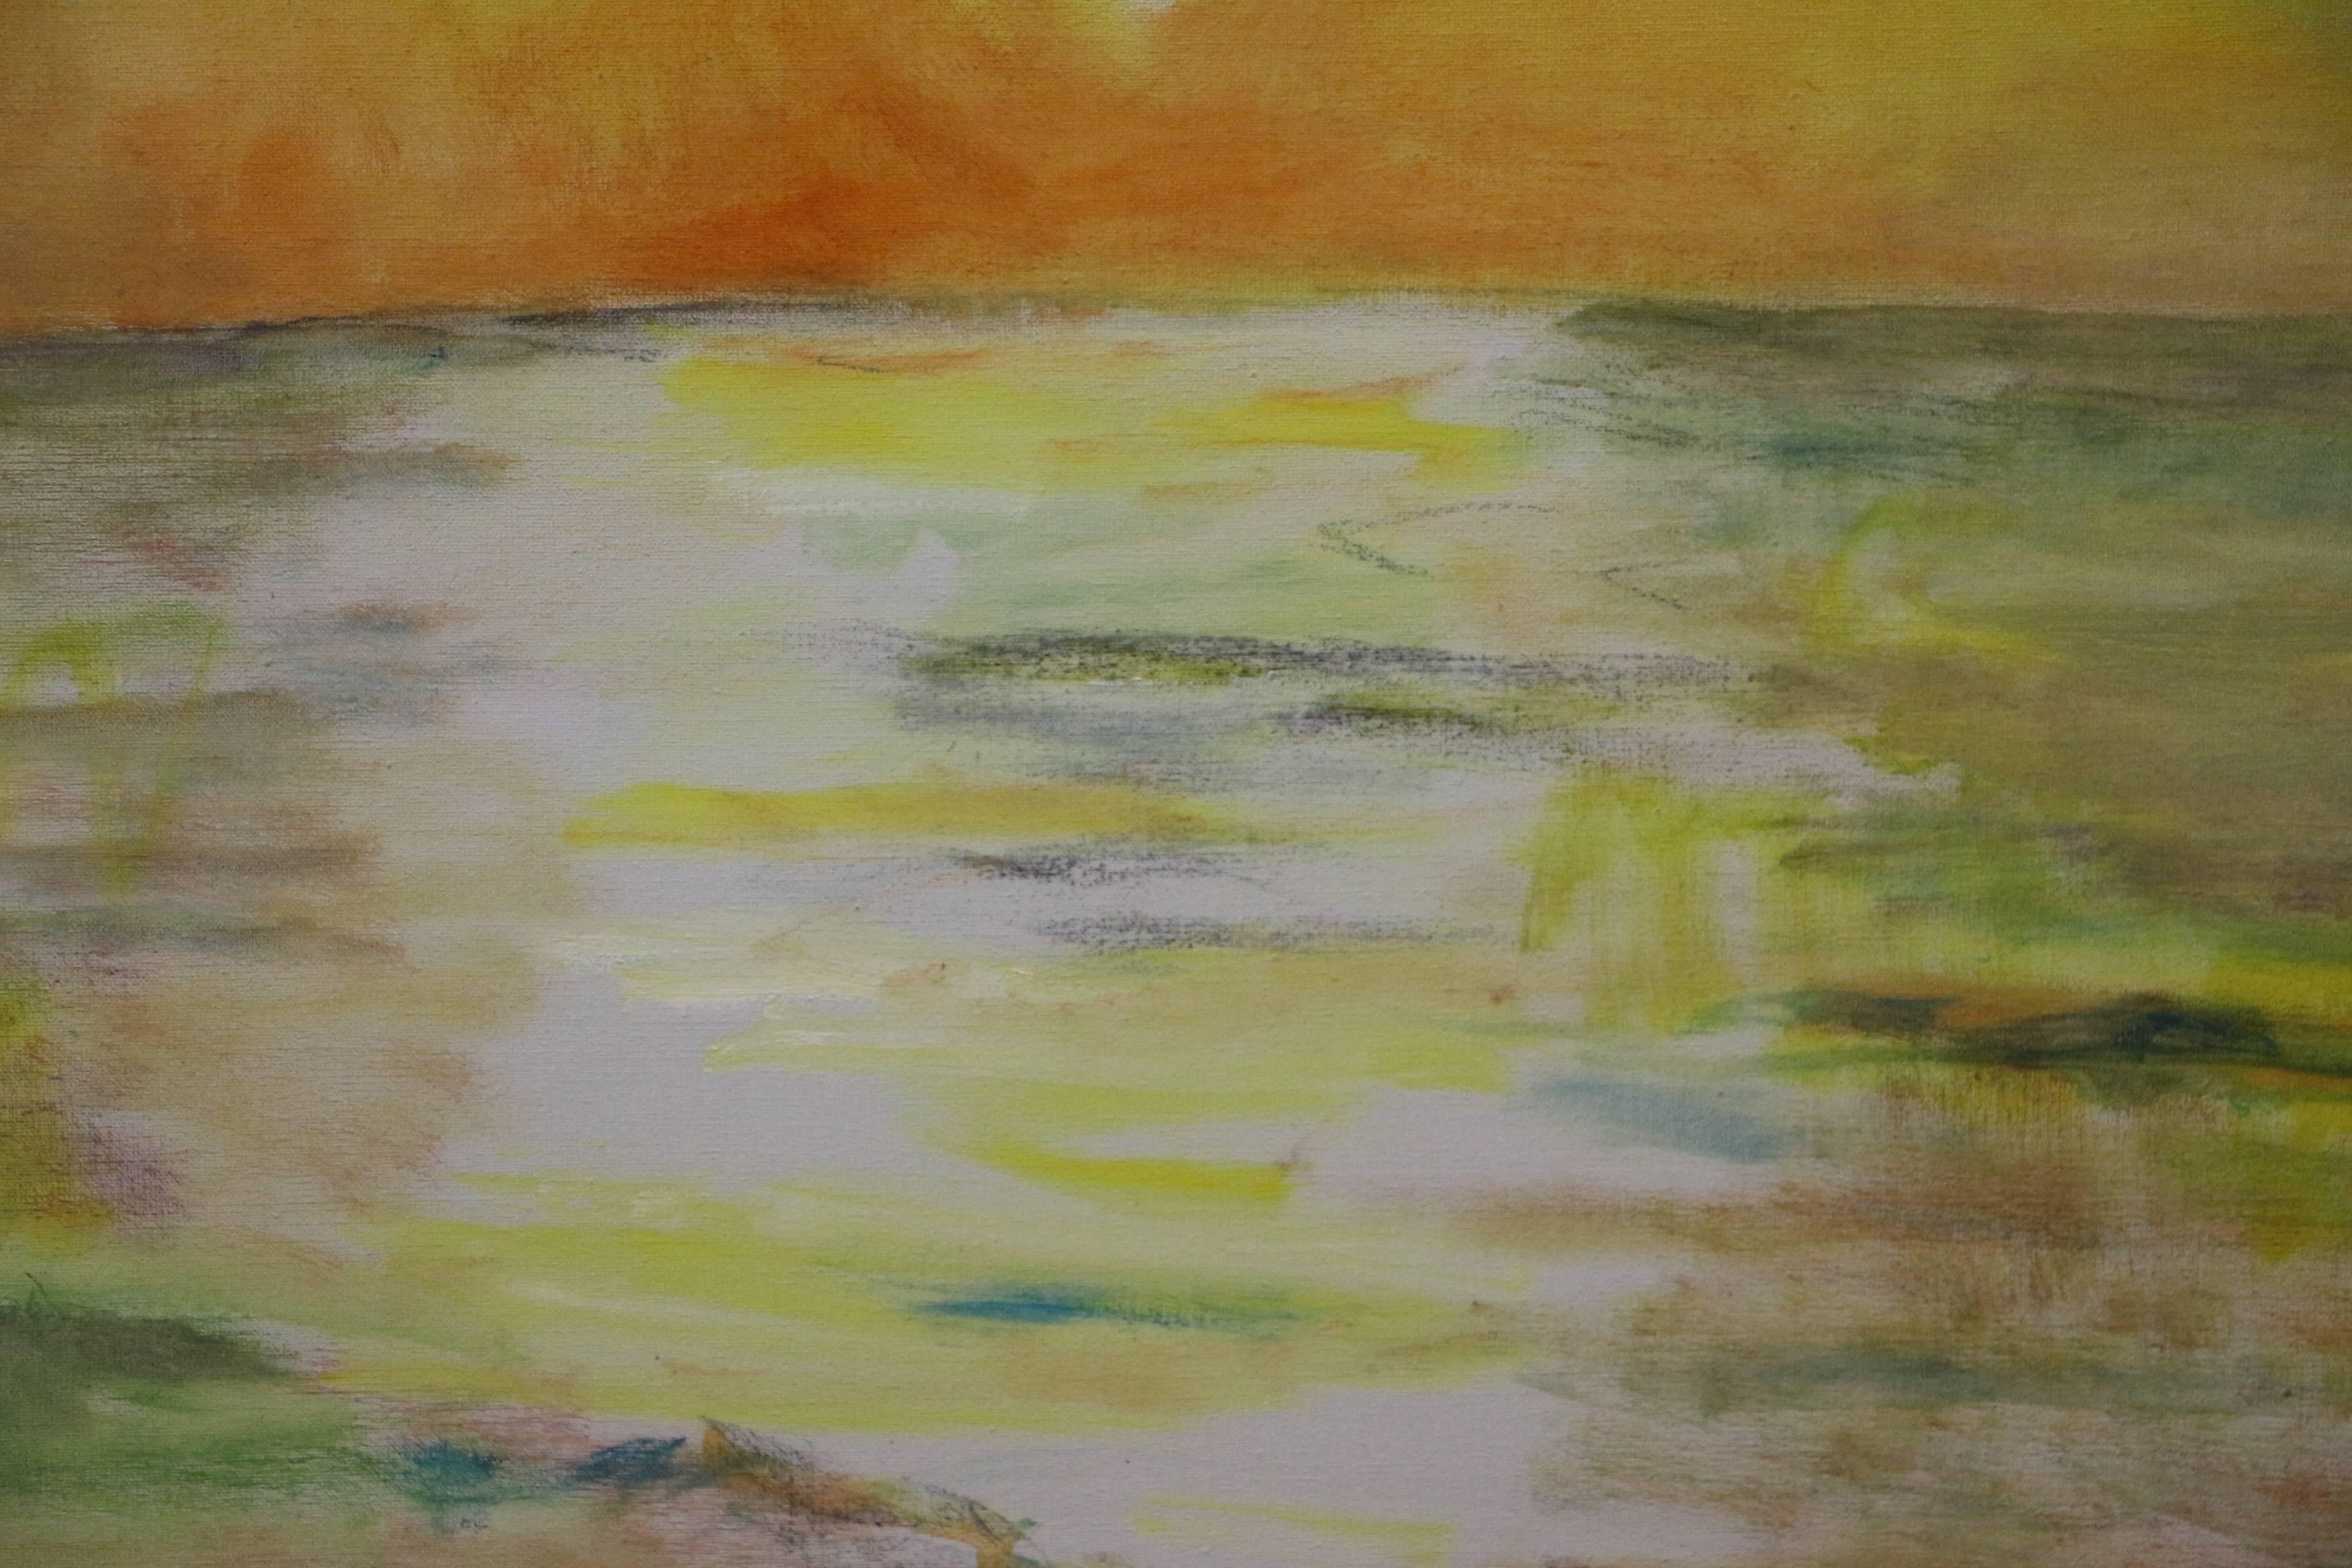 Depicted in this landscape oil painting is a low sun over the horizon of an ocean with the shoreline and waves visible. Wight uses many bright colors, including yellow, orange, red and green. . 

This original oil on canvas is representative of the